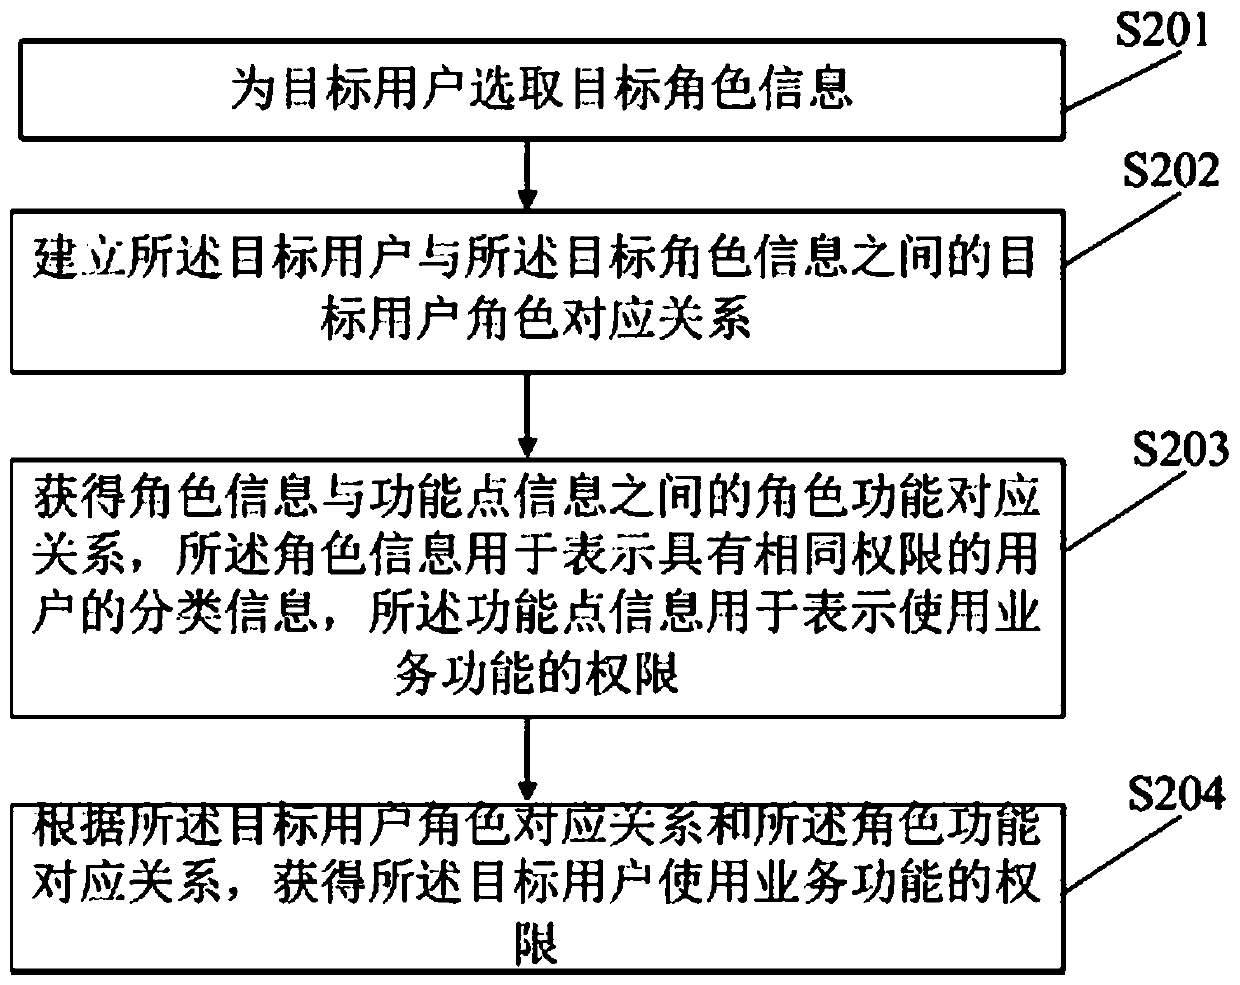 Permission processing method and device and permission control method and device